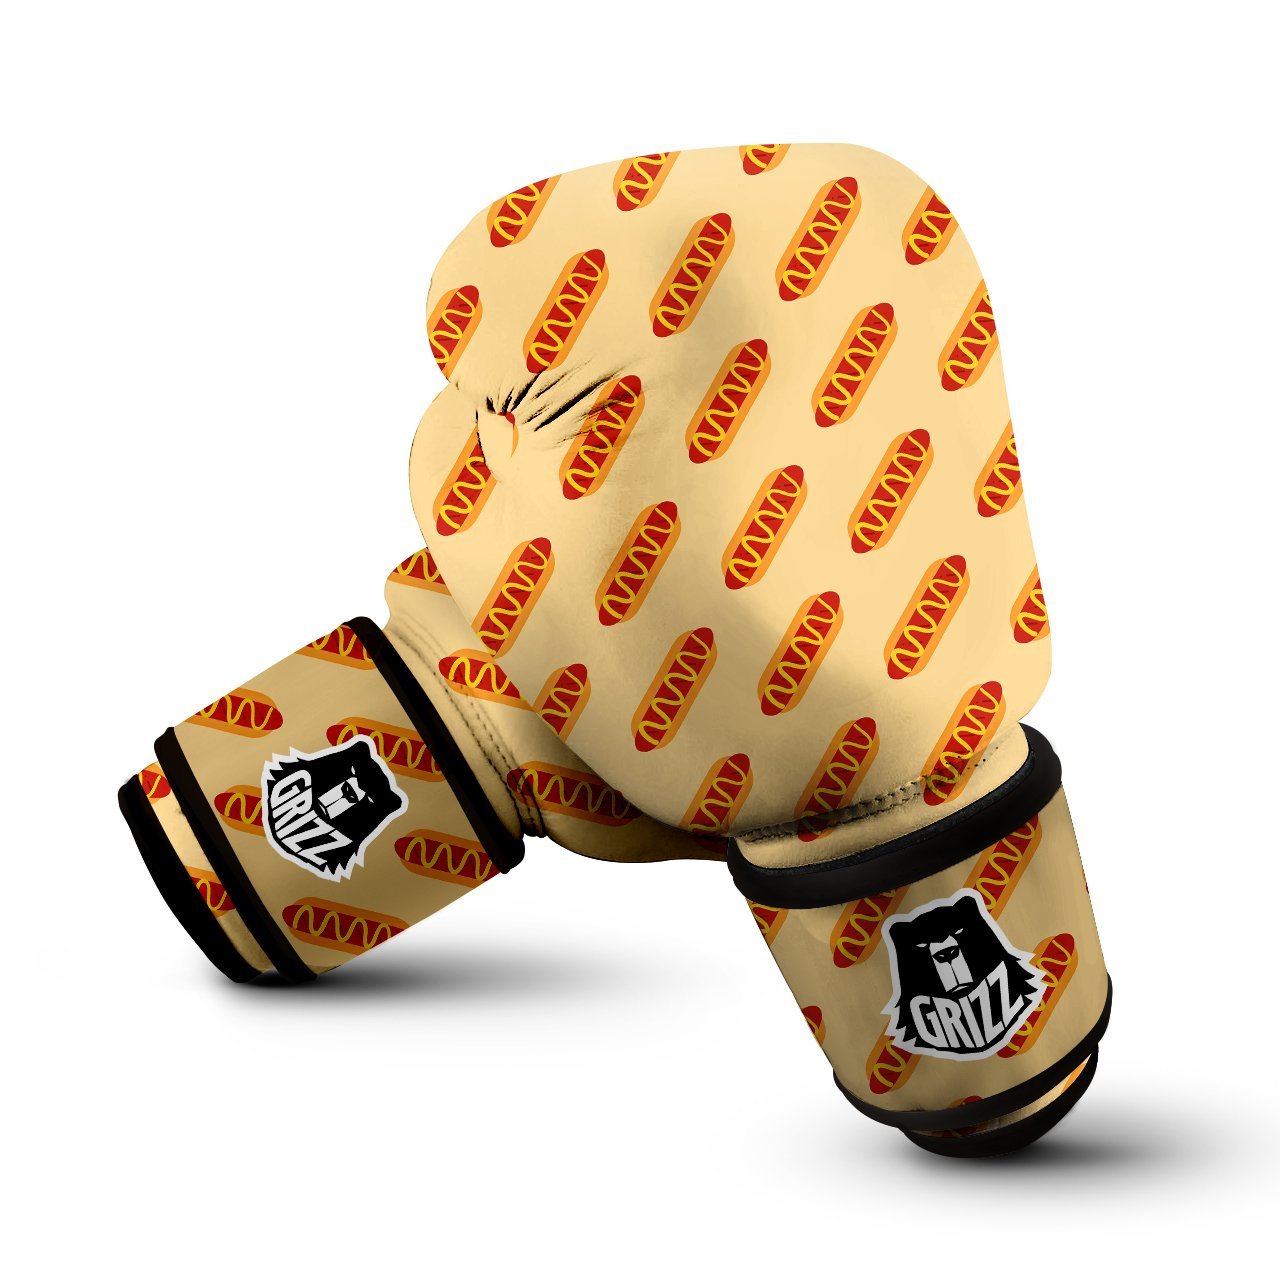 Hot Dog Yellow Print Pattern Boxing Gloves-grizzshop